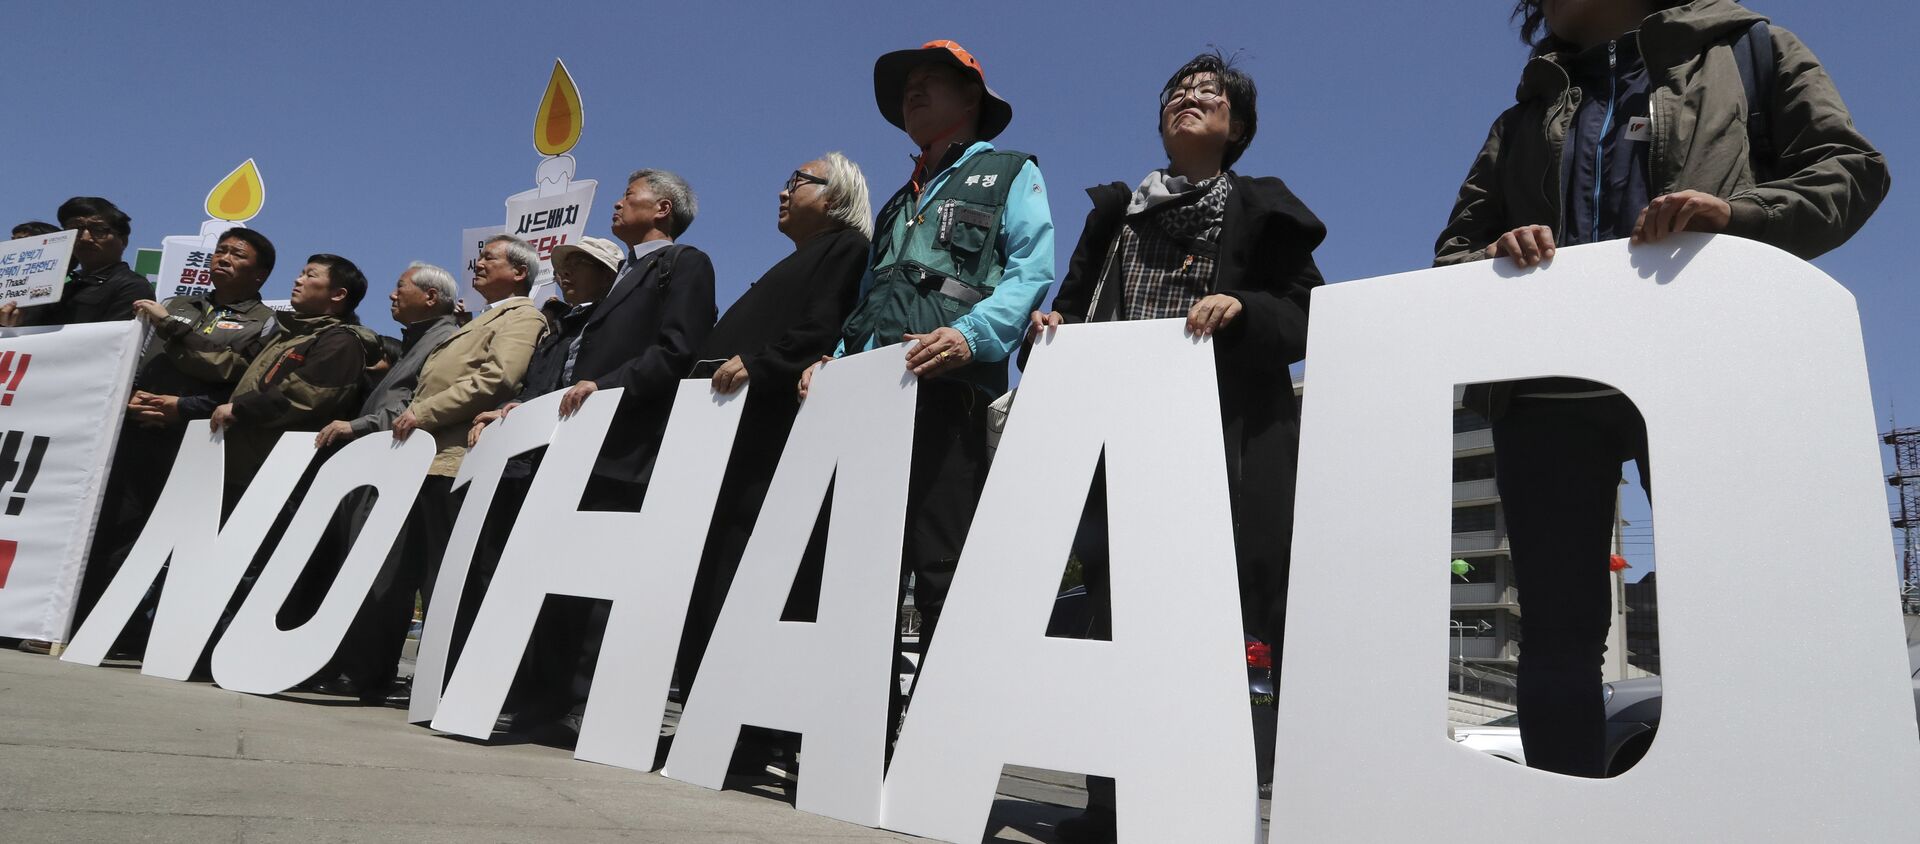 Protesters hold letters reading NO THAAD during a rally to oppose a plan to deploy an advanced U.S. missile defense system called Terminal High-Altitude Area Defense, or THAAD, near U.S. Embassy in Seoul, South Korea, Wednesday, April 26, 2017 - Sputnik International, 1920, 06.07.2018